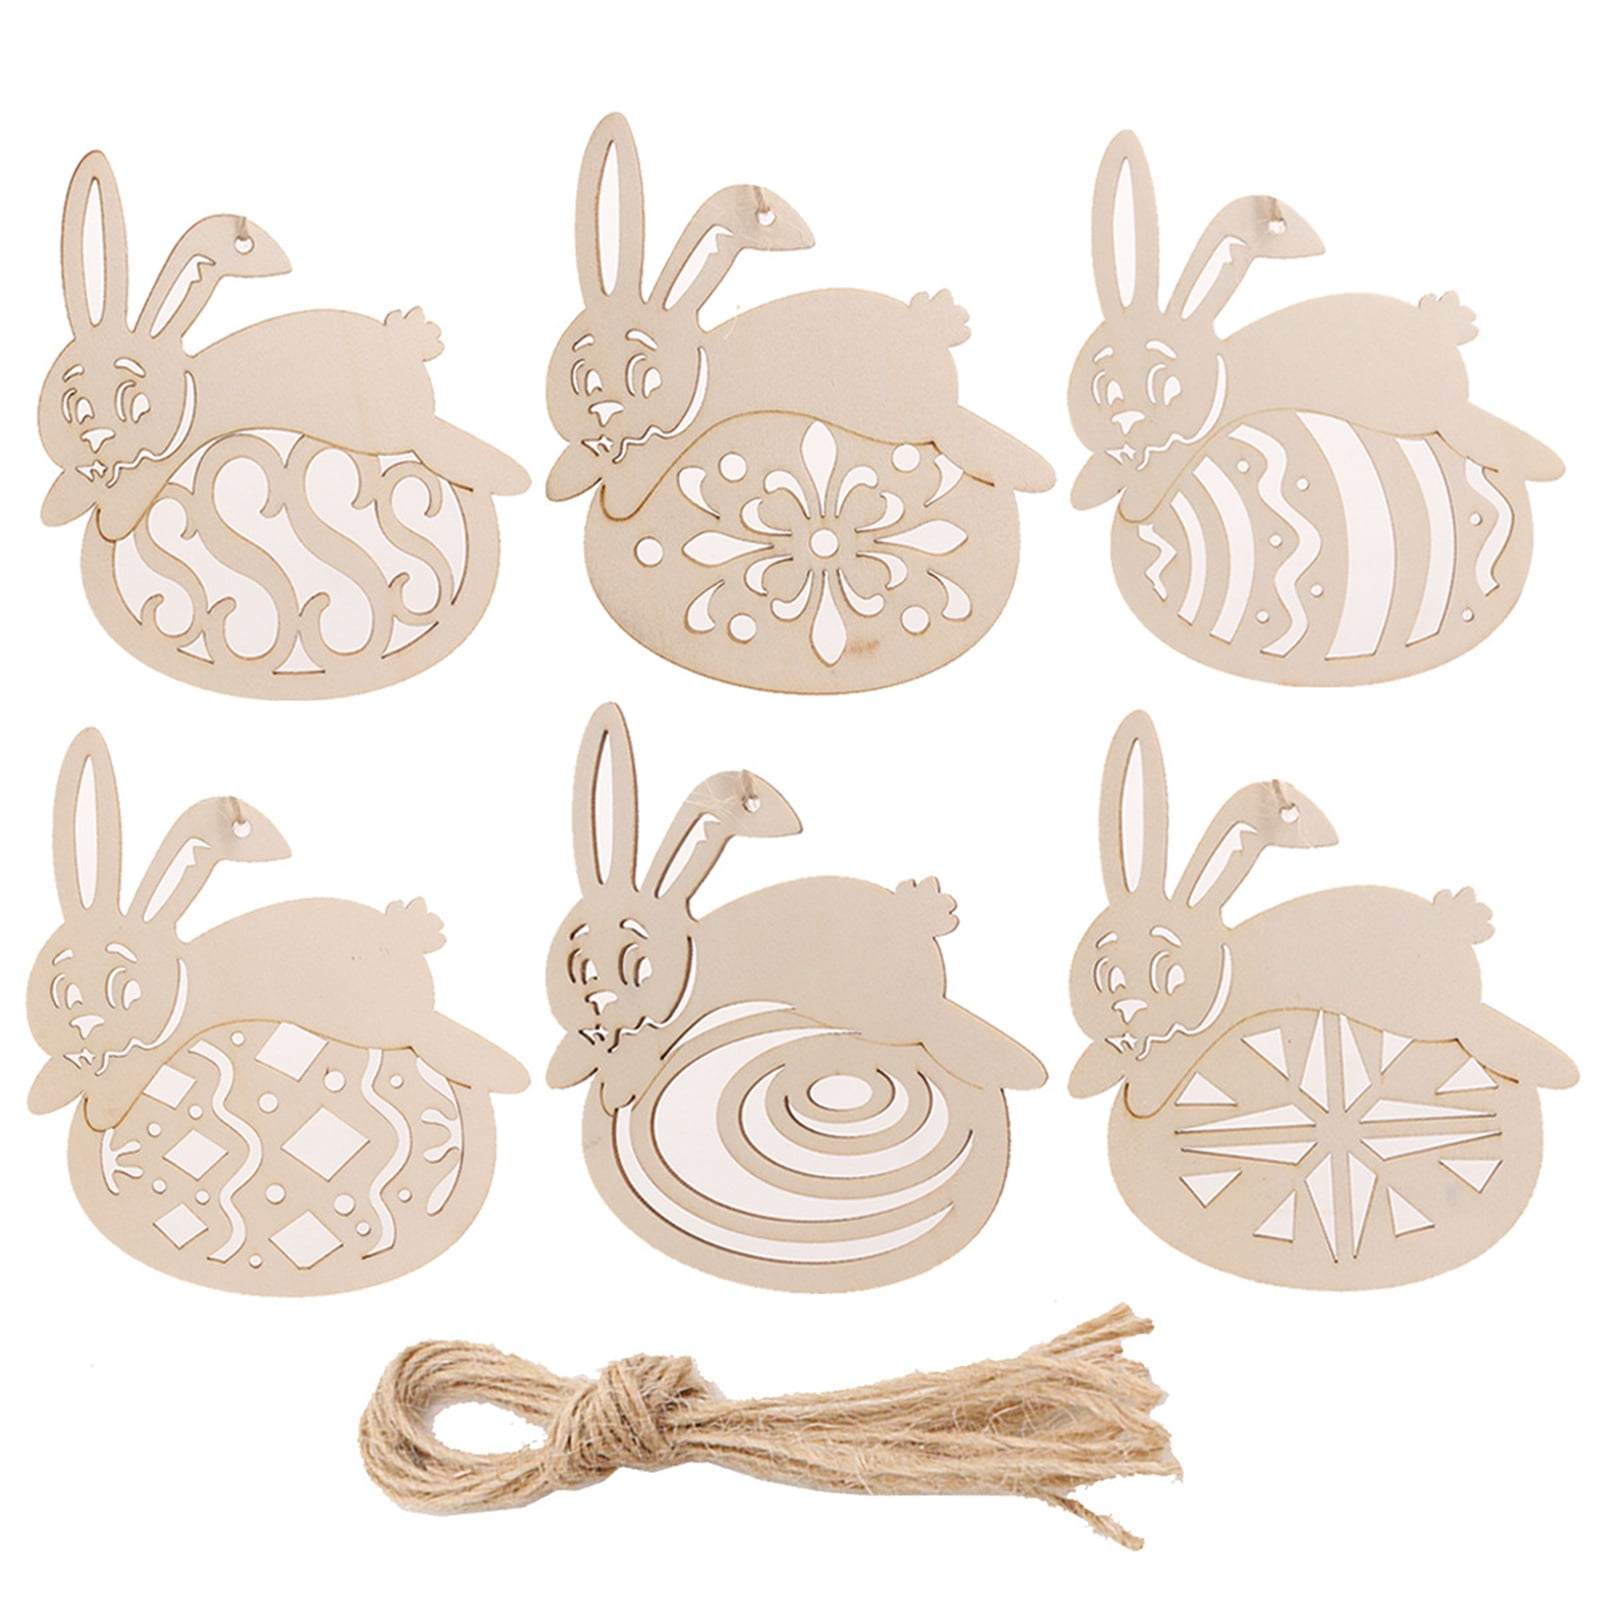 Details about   3PCS Wooden Bunny Rabbit Ornaments Home DIY Hanging for Easter Spring Decoration 